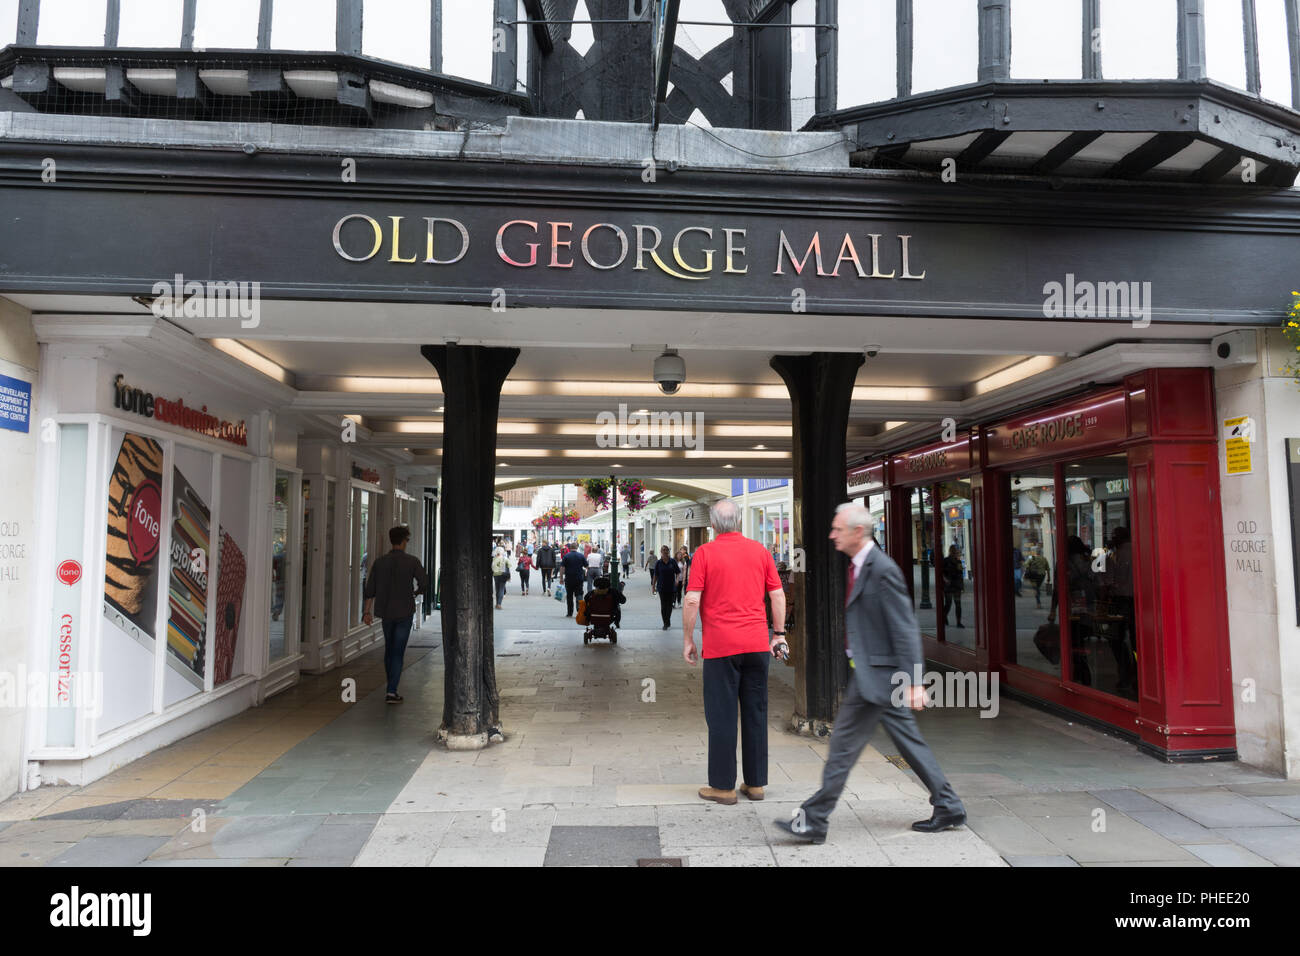 Entrance to Old George Mall shopping centre off of the High Street in Salisbury, Wiltshire, UK Stock Photo